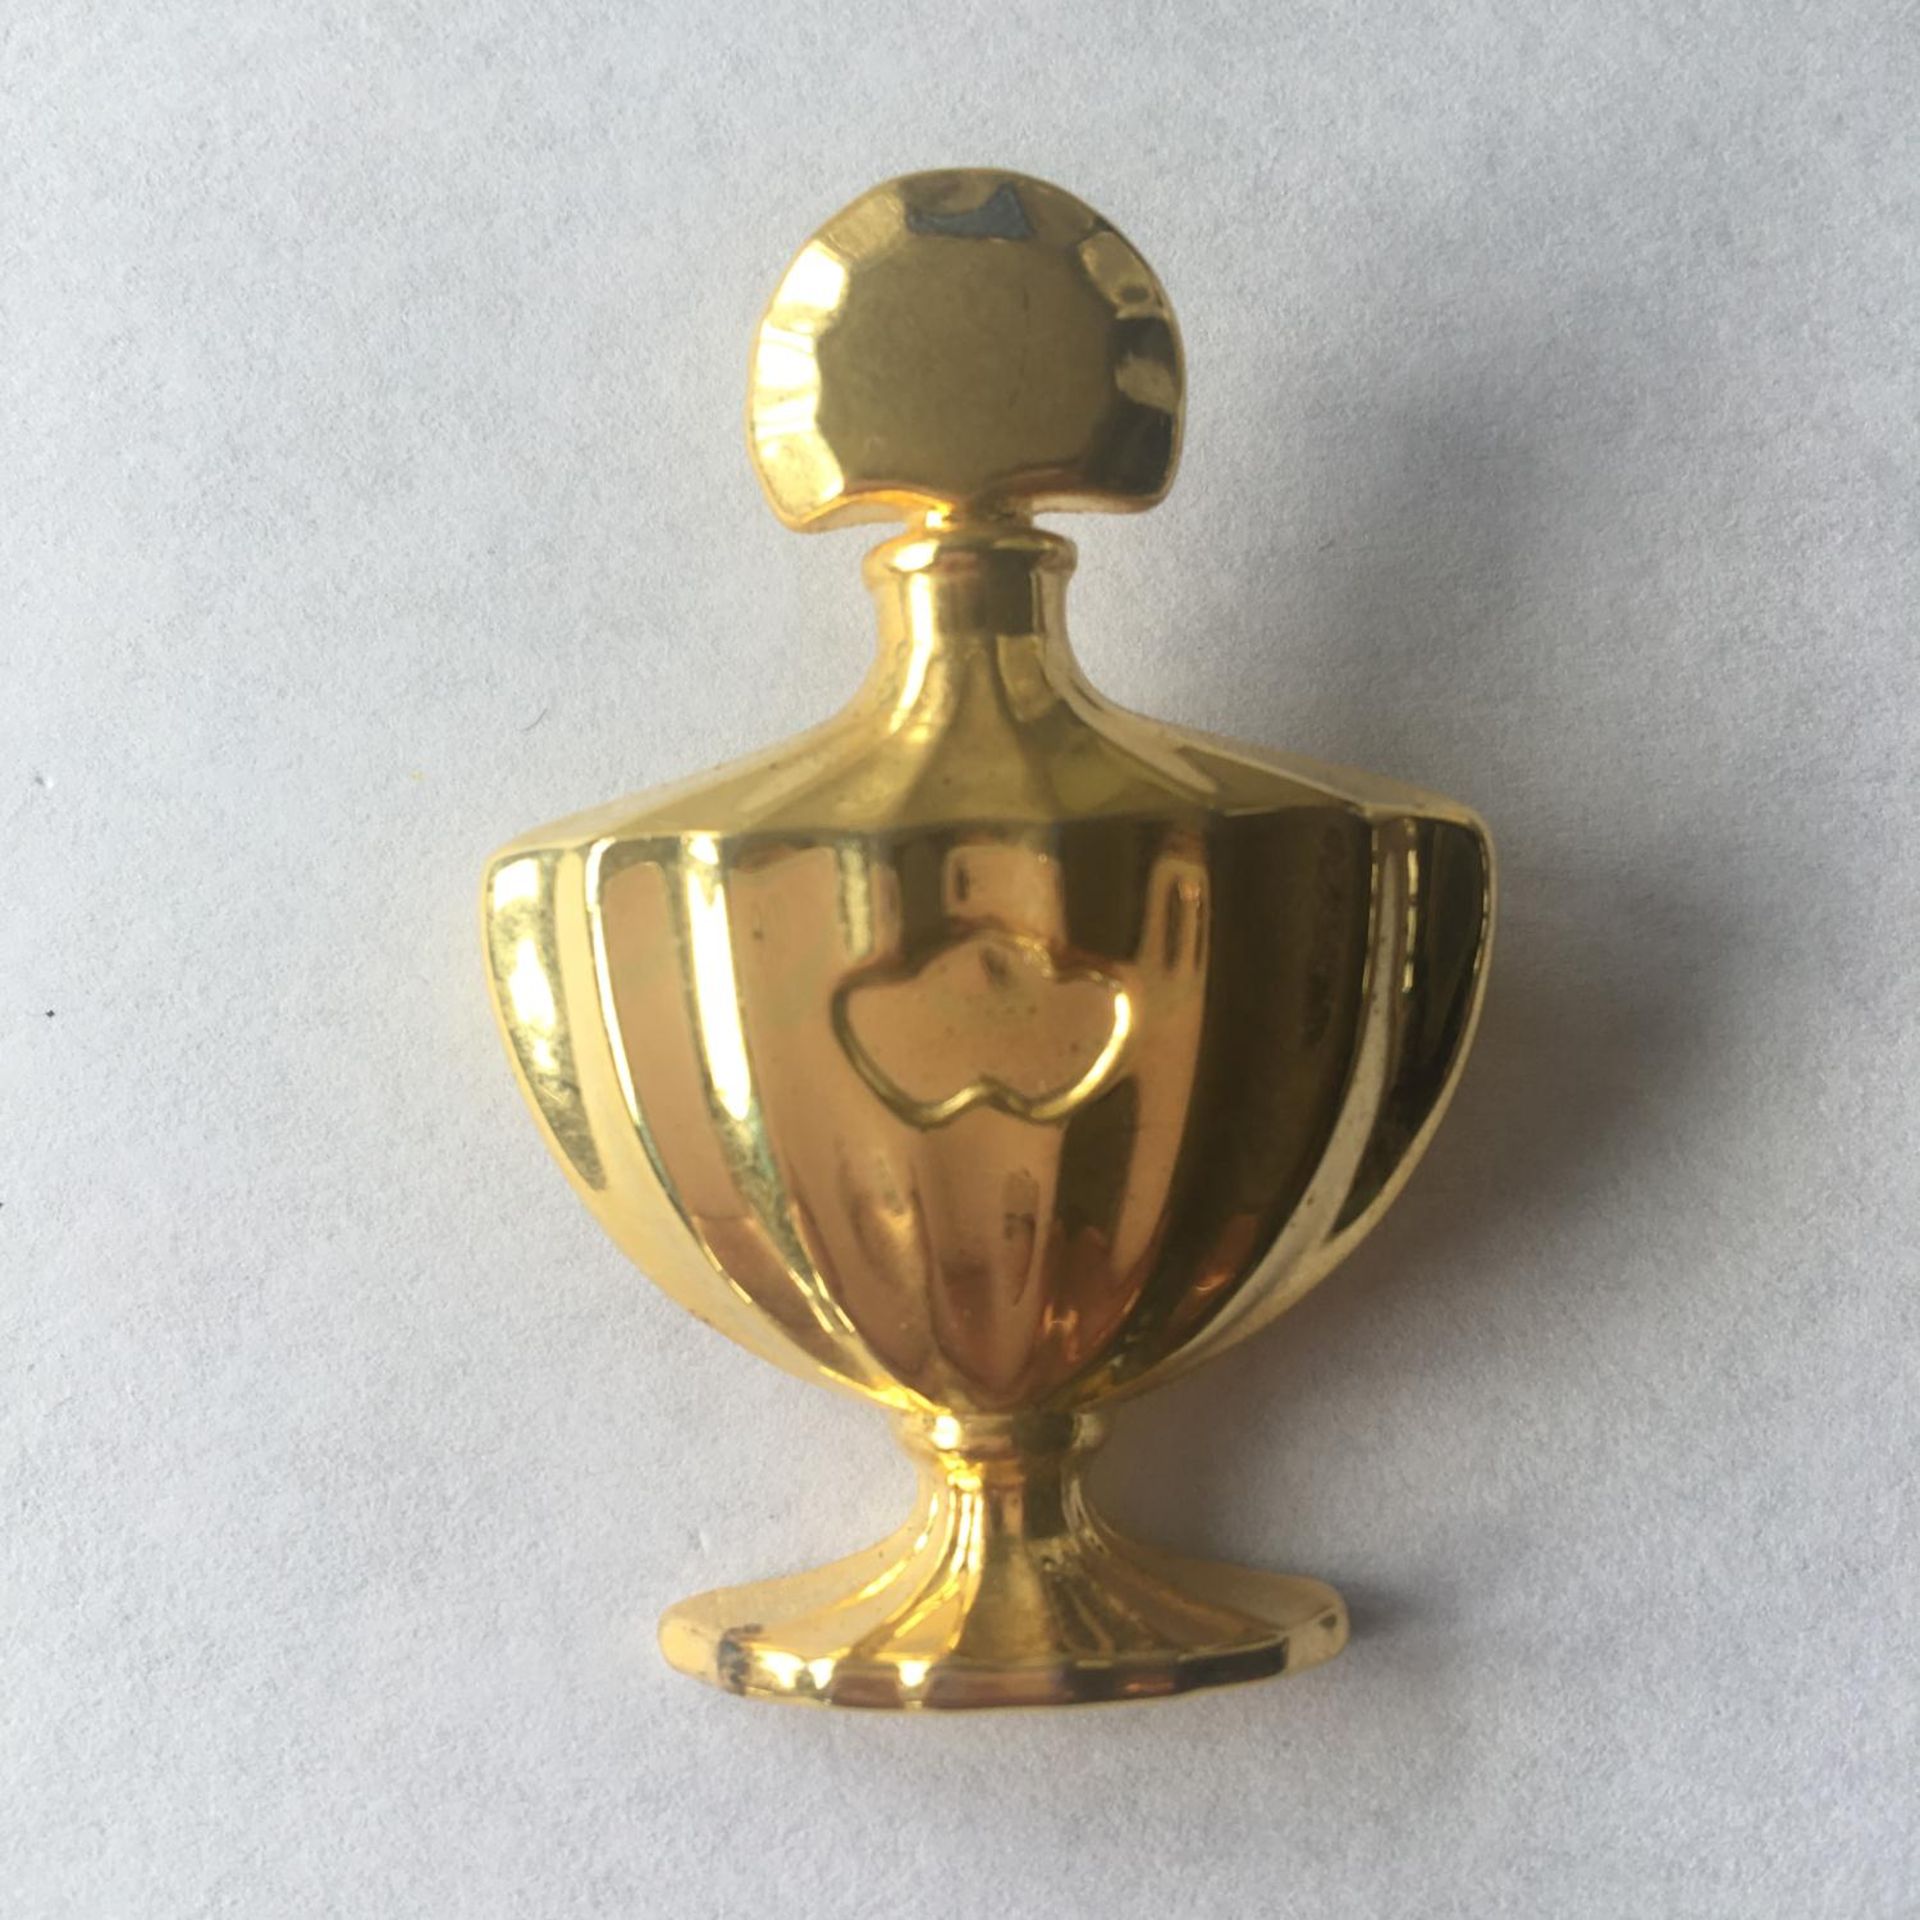 Guerlain Paris pin brooch in the form of a perfume bottle. Includes free UK delivery.